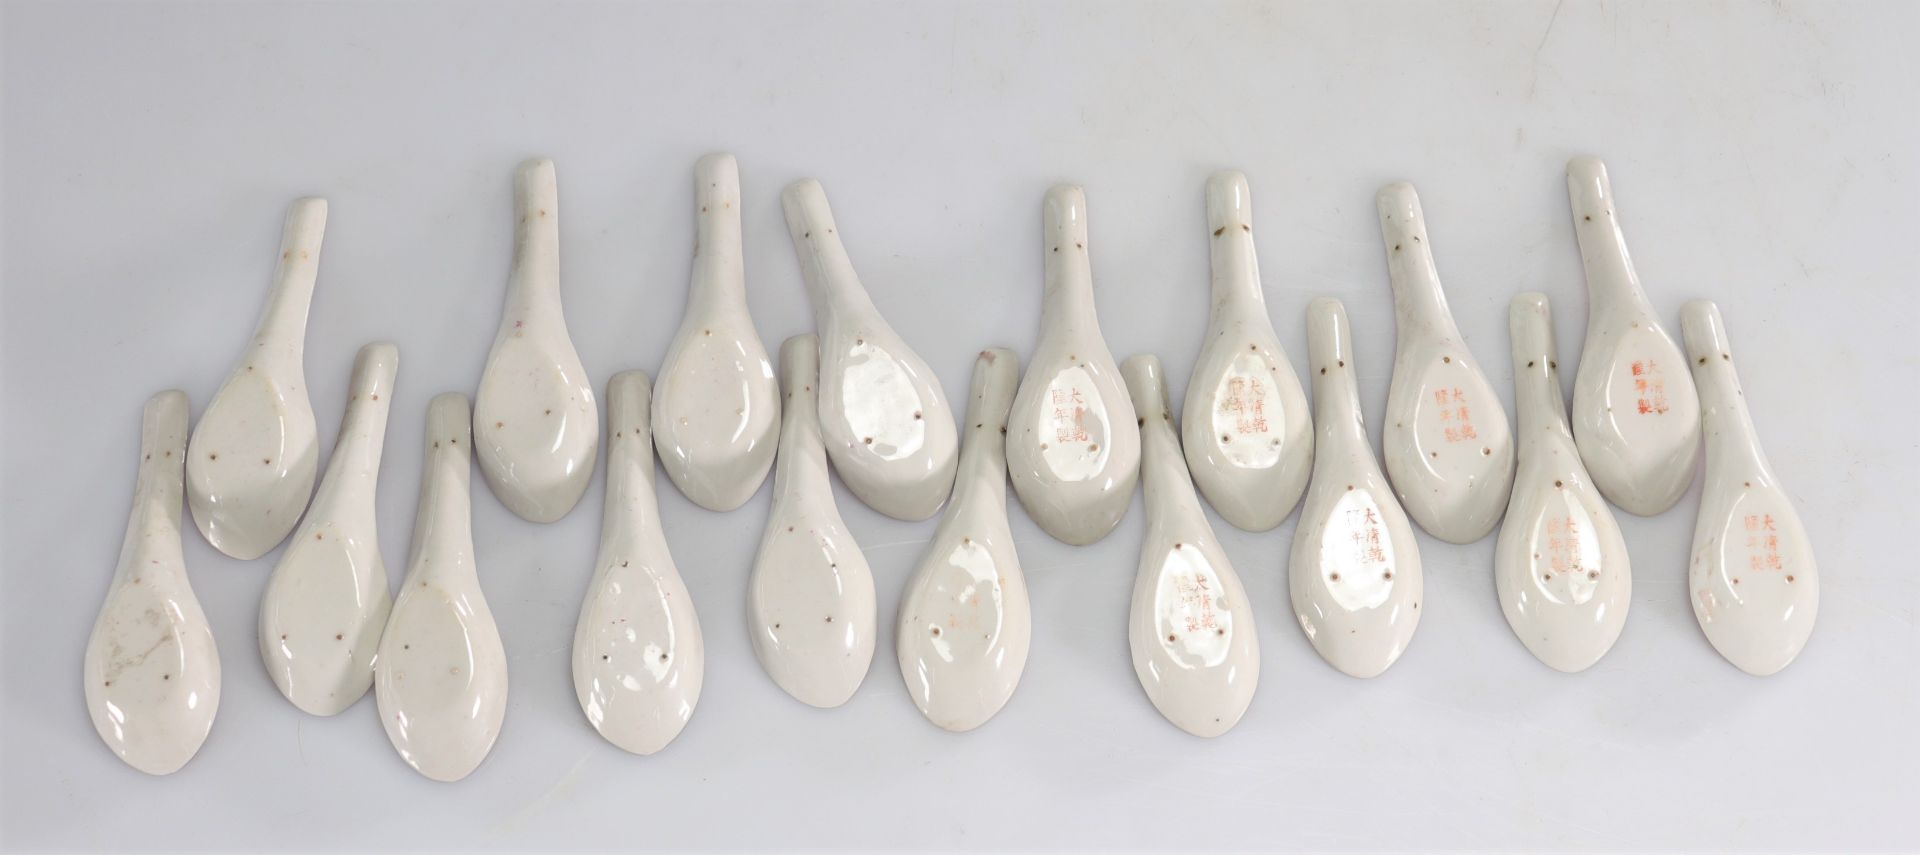 Spoons (18) in Chinese famille rose porcelain - Image 2 of 2